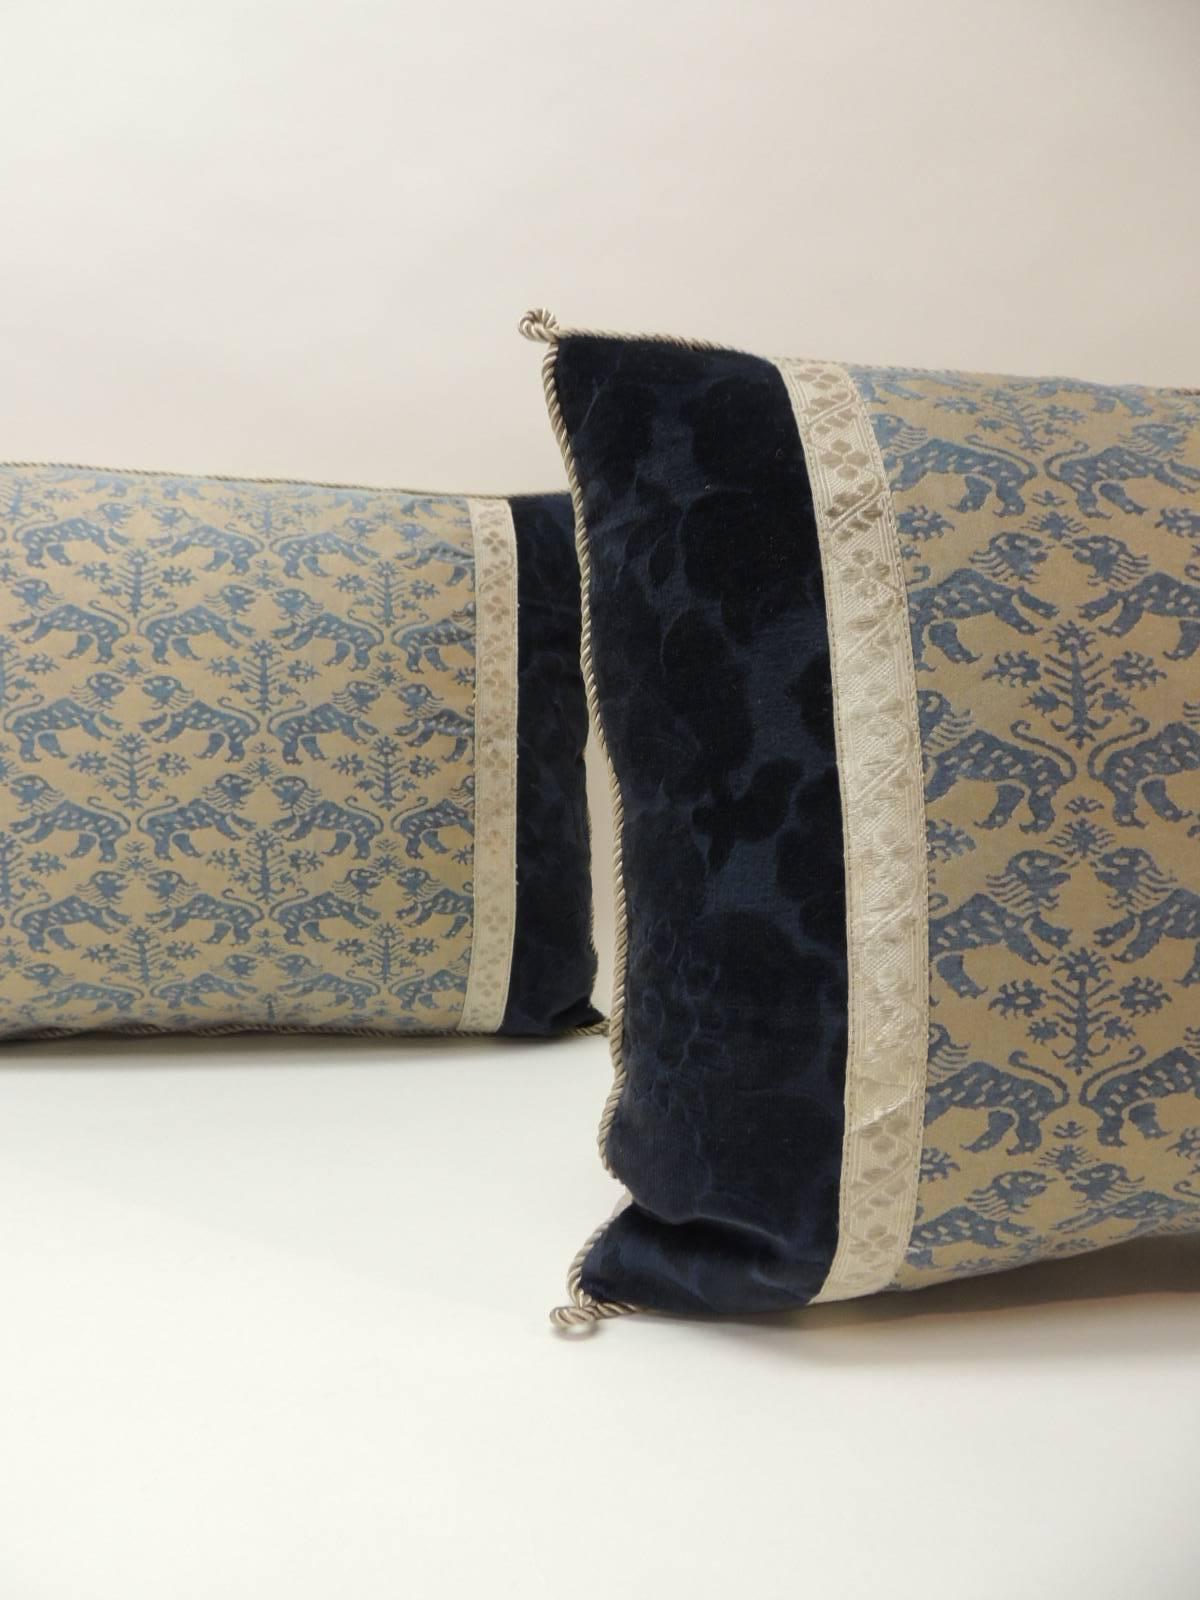 Pair of vintage Fortuny “Richelieu” blue on silver decorative bolster pillows, framed with antique cotton floral velvet and embellished with antique silver metallic tape trim. Accentuated with silk rope trim. Golden silk backings.
Decorative pillows